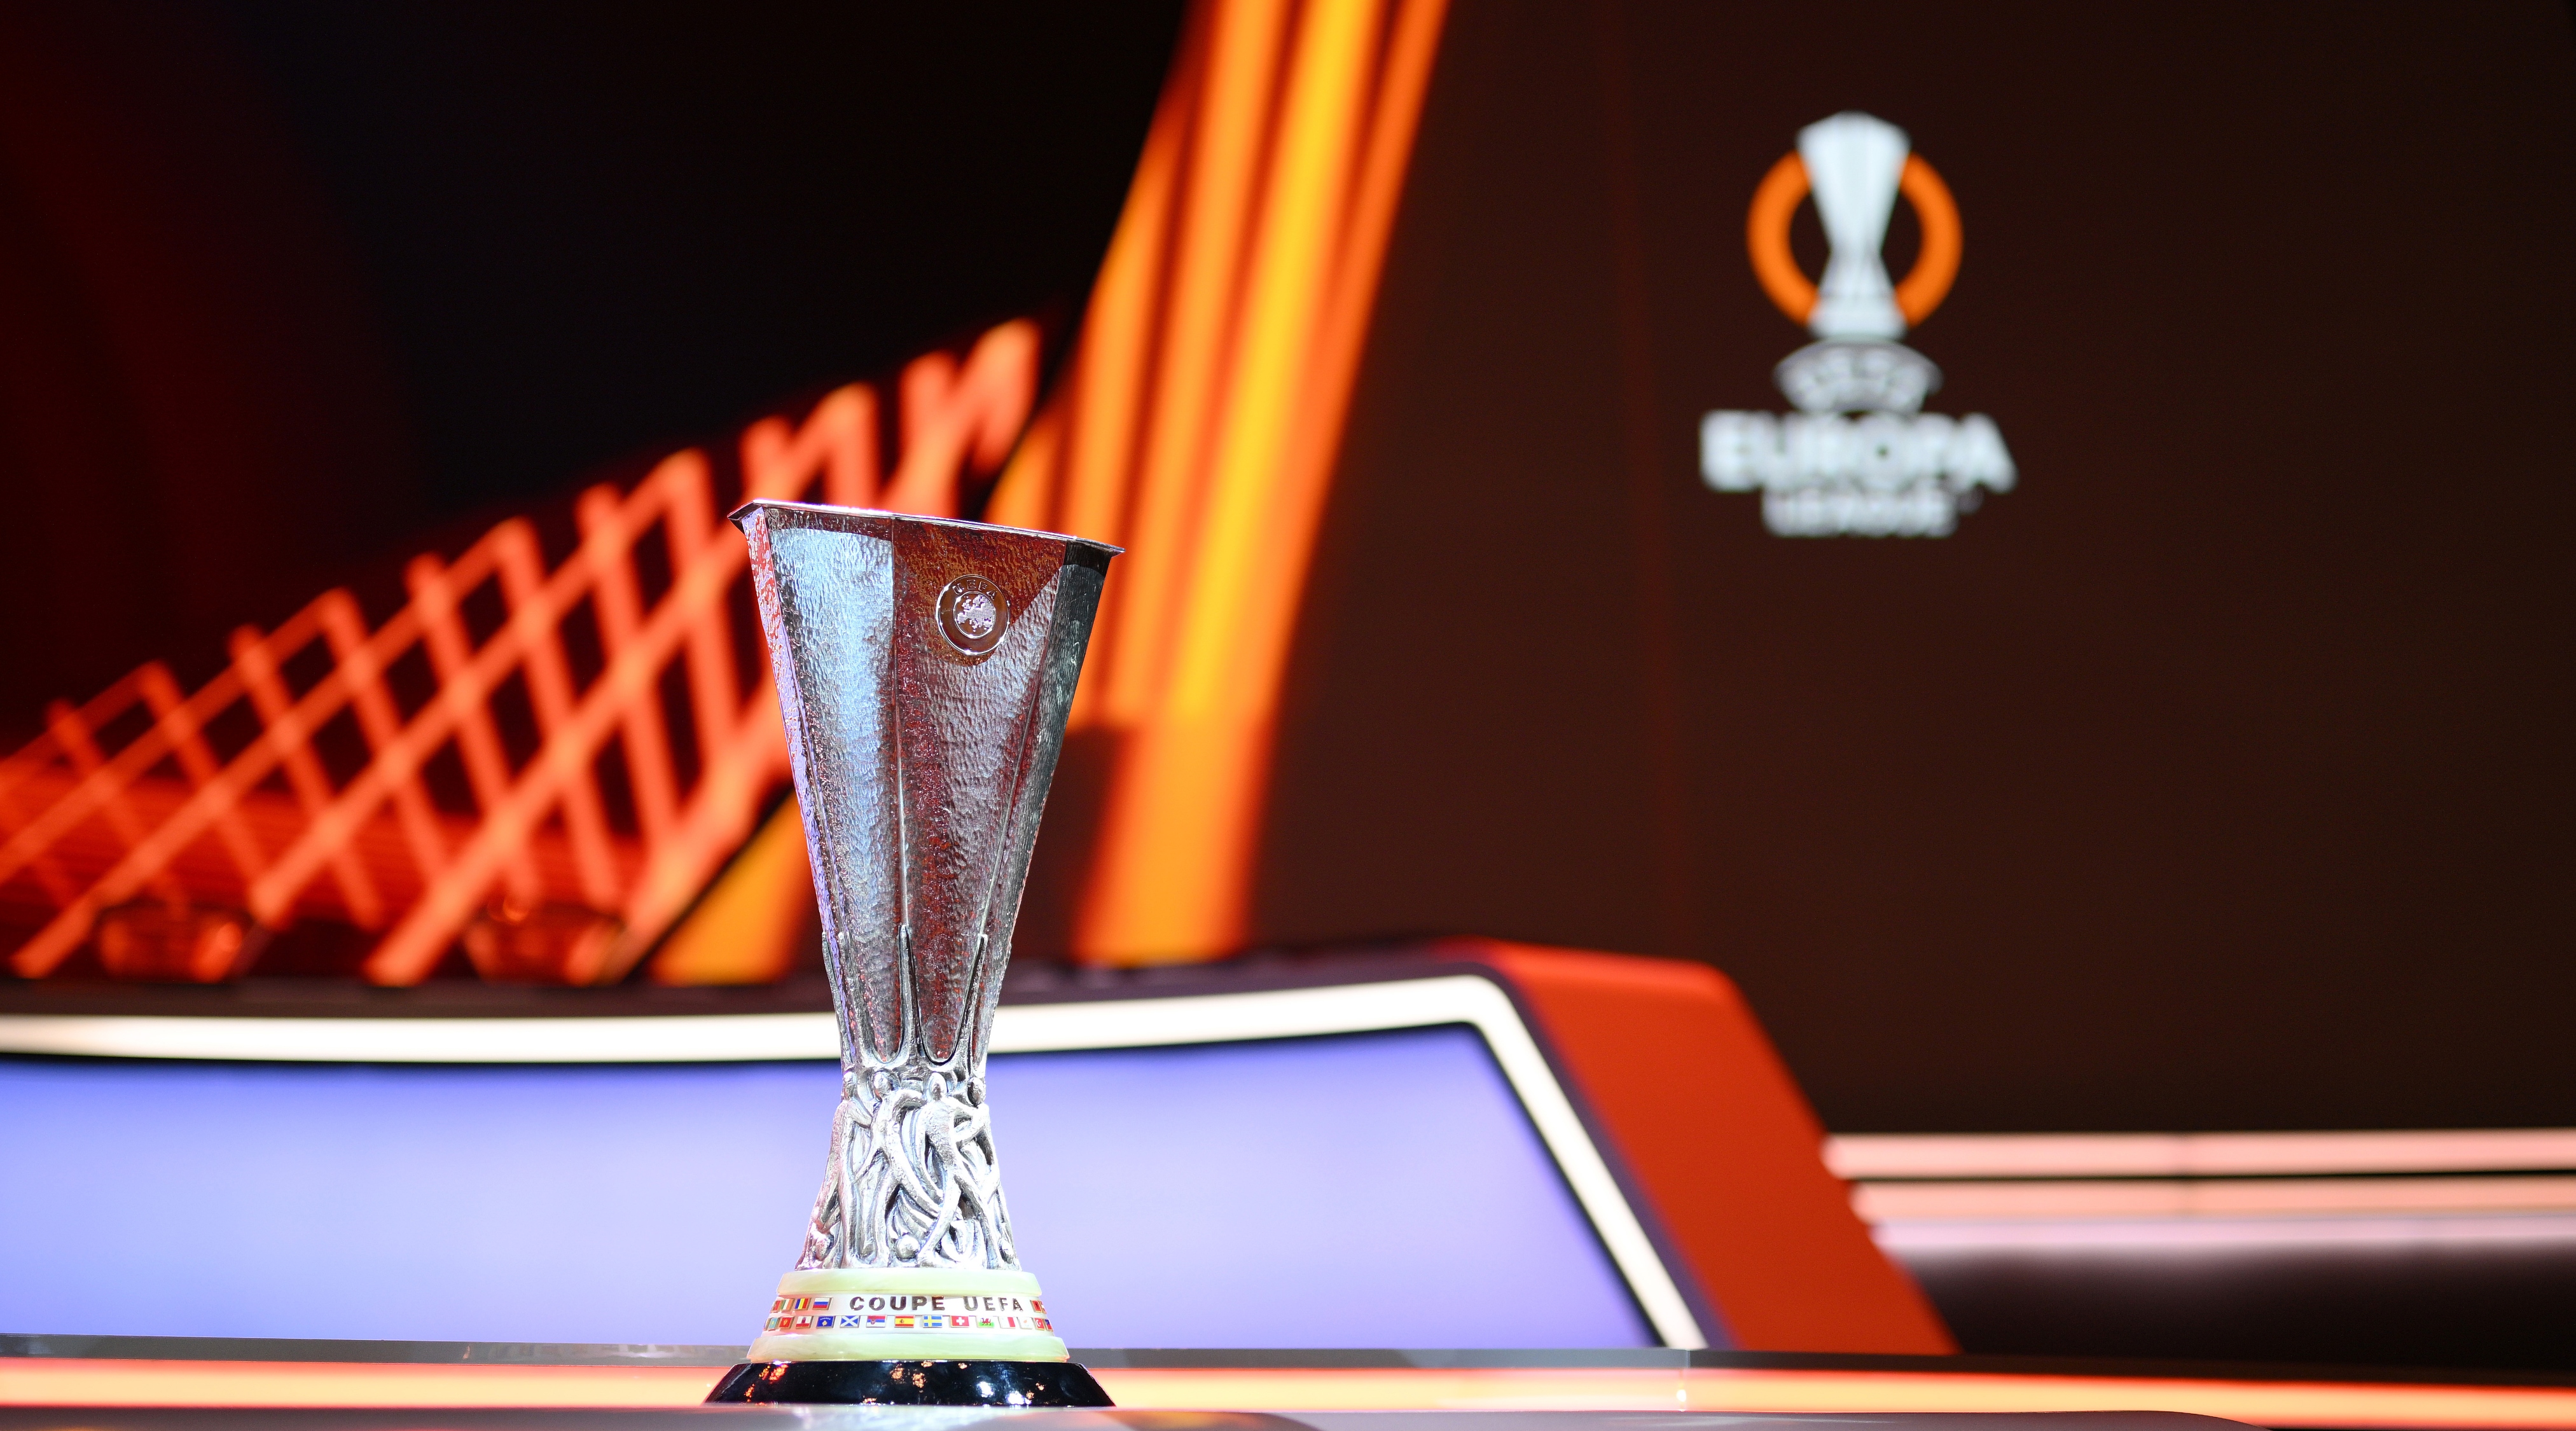 Europa League 2022/23: Group stage fixtures announced